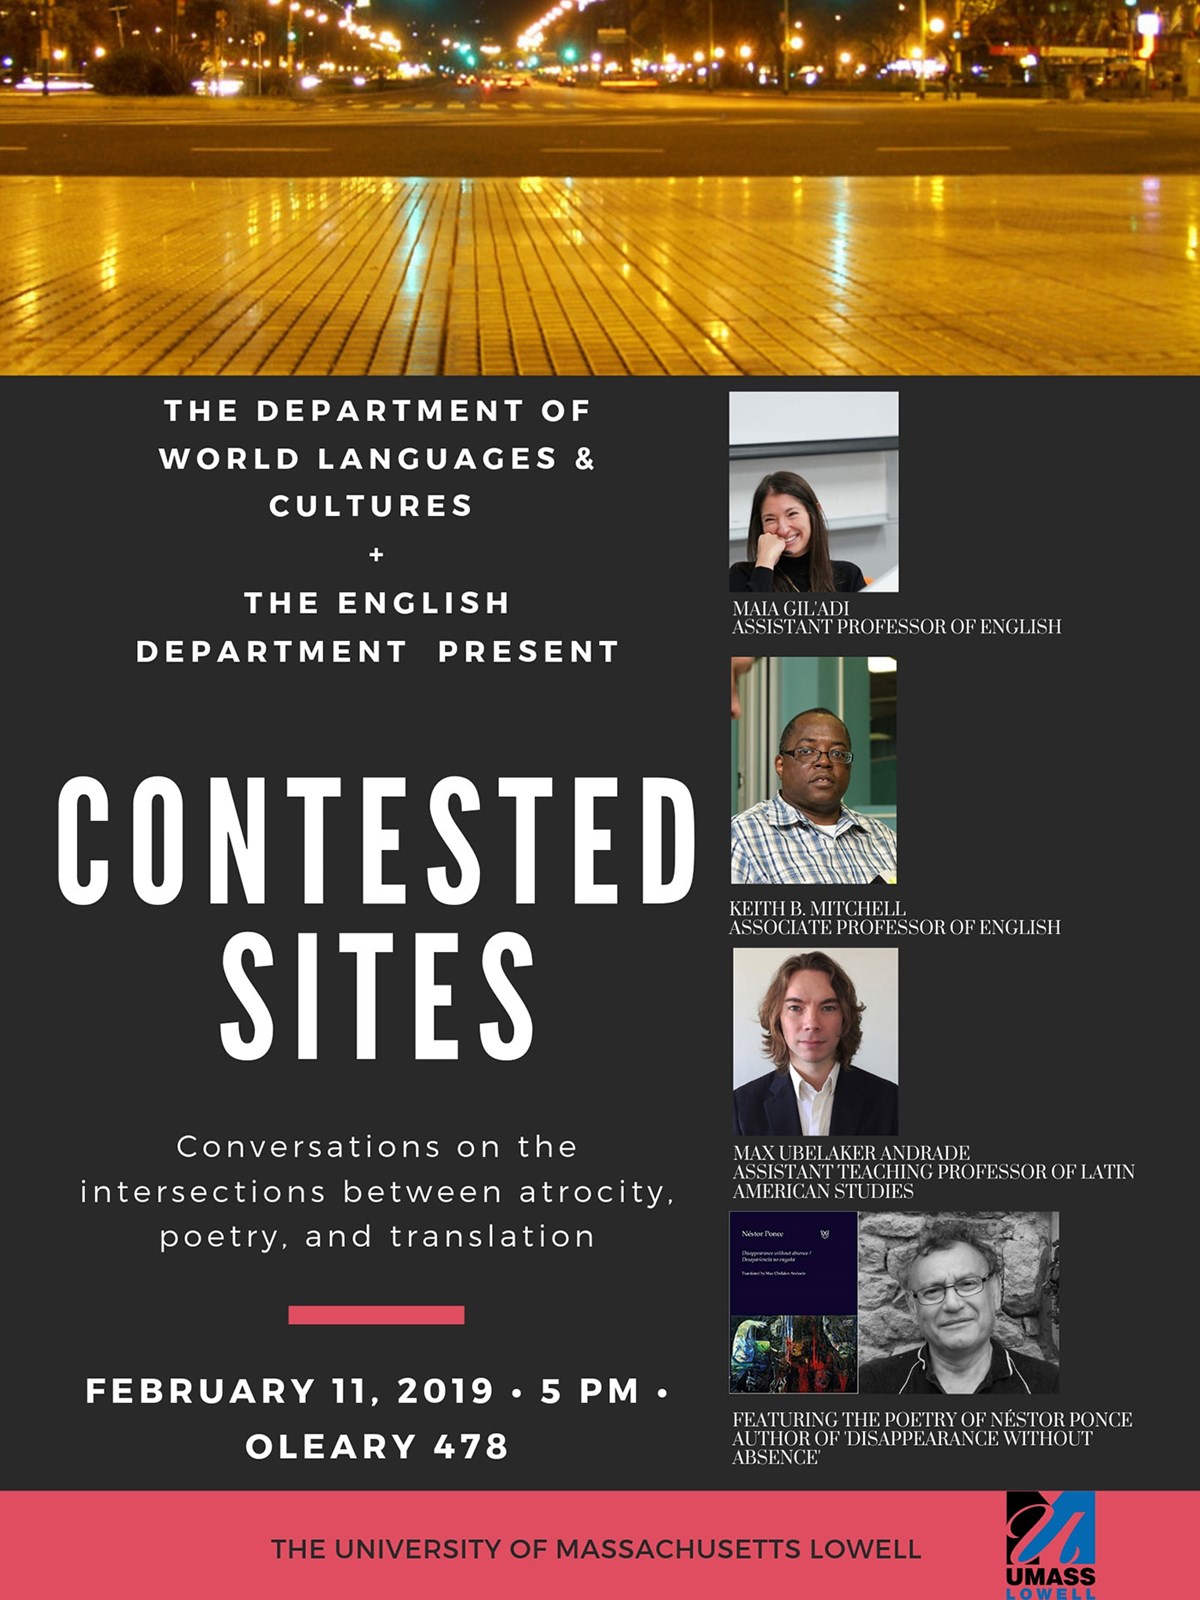 On February 11, 2019, the Department of English and the Department of World Languages & Cultures jointly put together an event titled “Contested Sites.” It was focused on the exploration and discussion of a book by the Argentinian poet Néstor Ponce titled Disappearance without absence (Desapariencia no engaña). The book is dedicated to the individuals who were kidnapped, tortured and murdered by the military dictatorship in Argentina (1976 -1983).